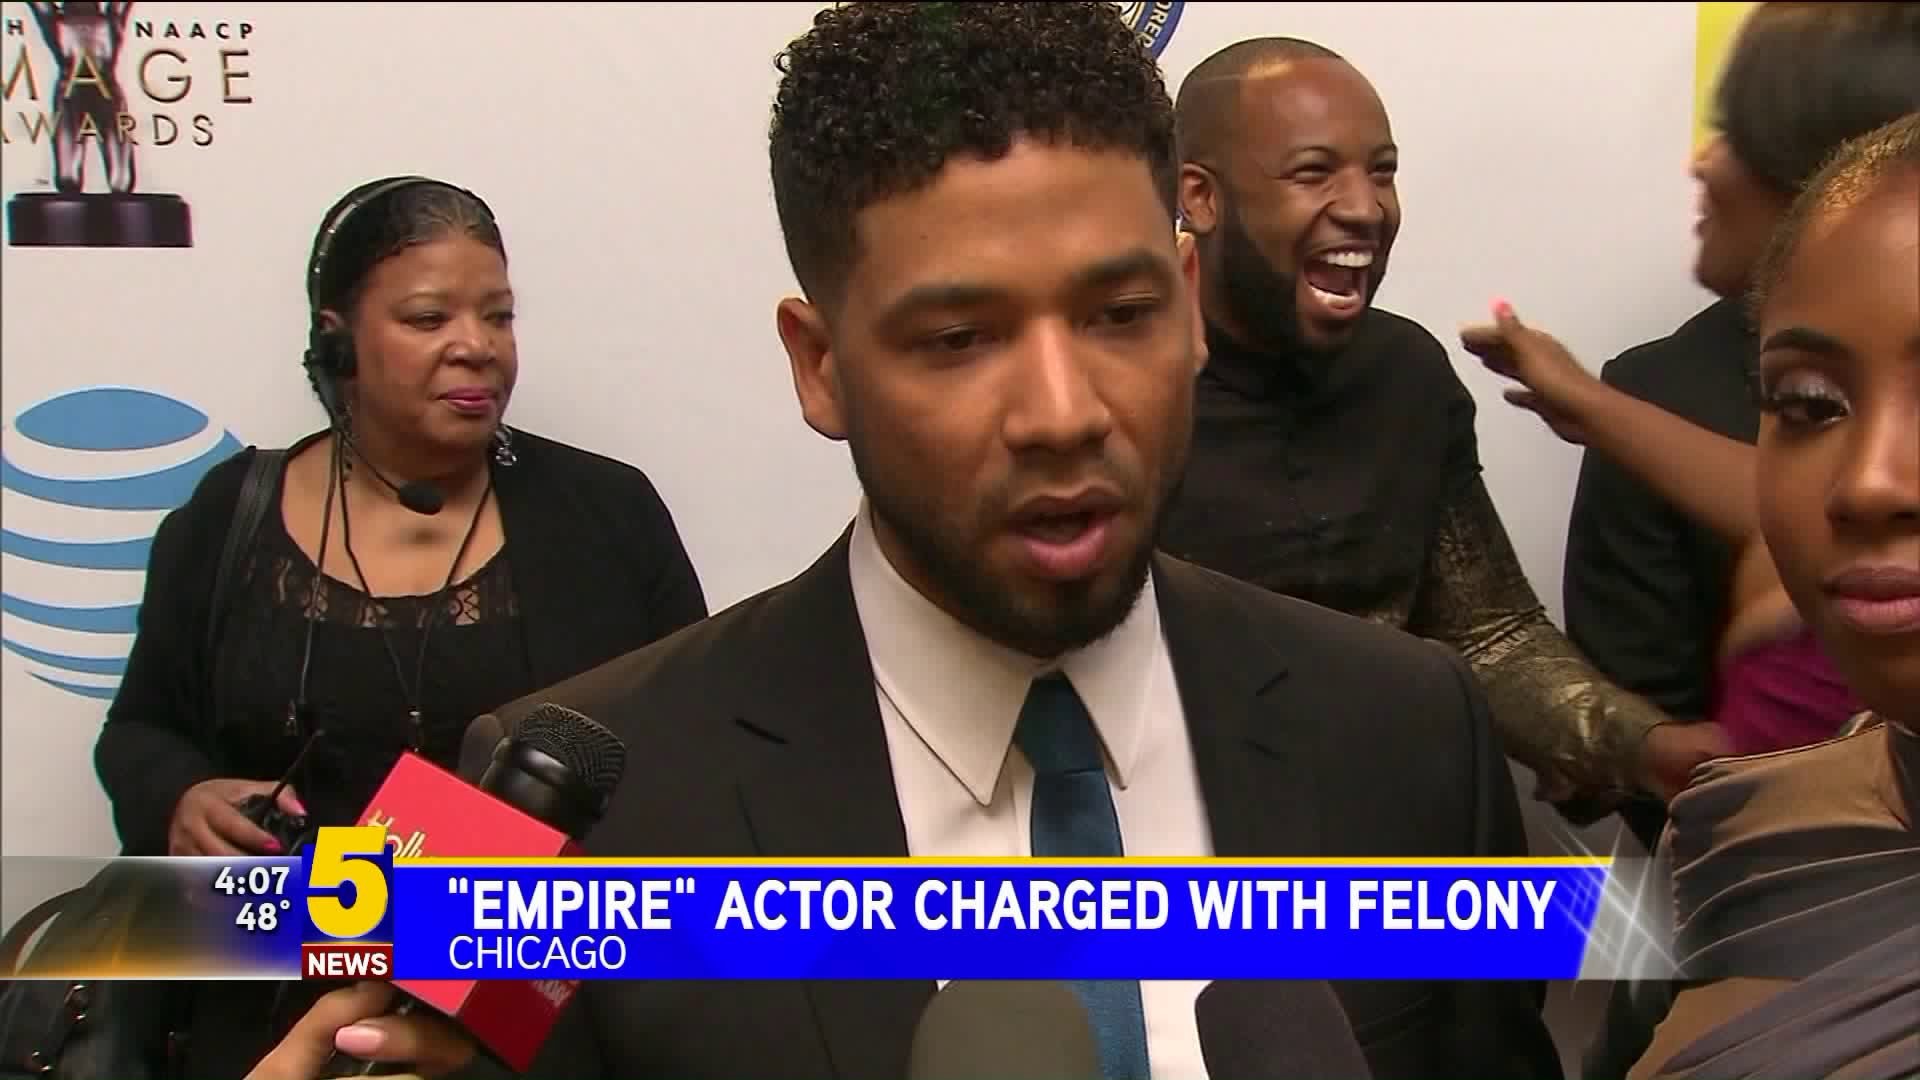 "Empire" Actor Charged With Felony